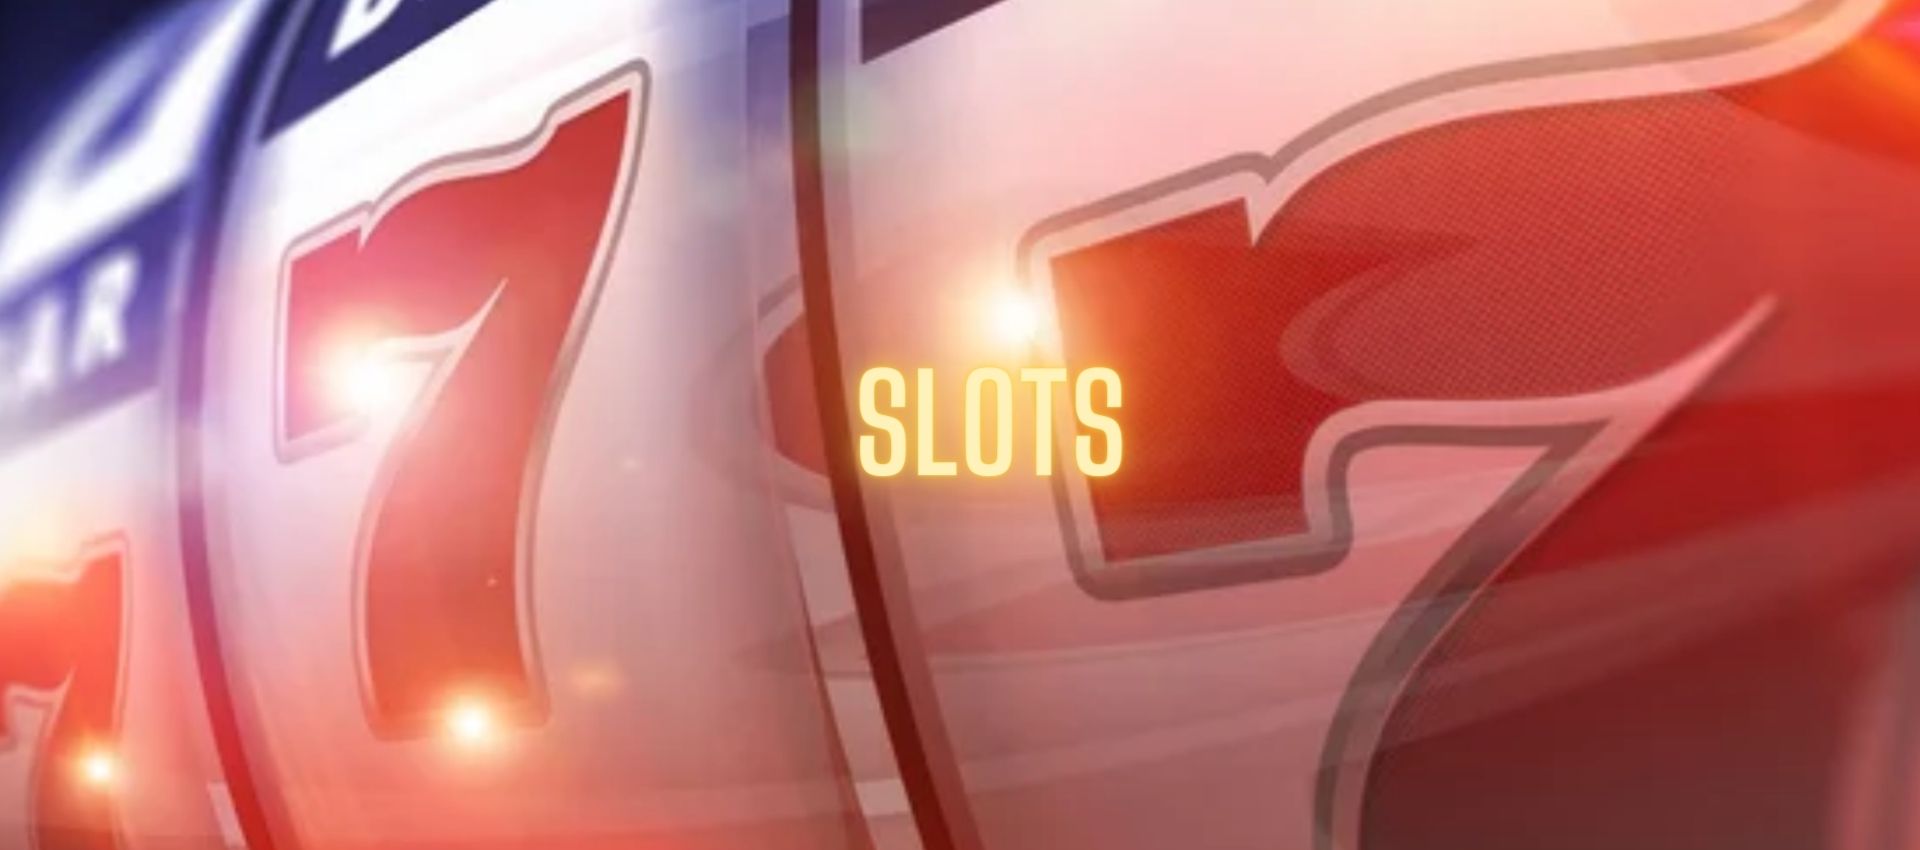 How to play online slots in India detailed guide